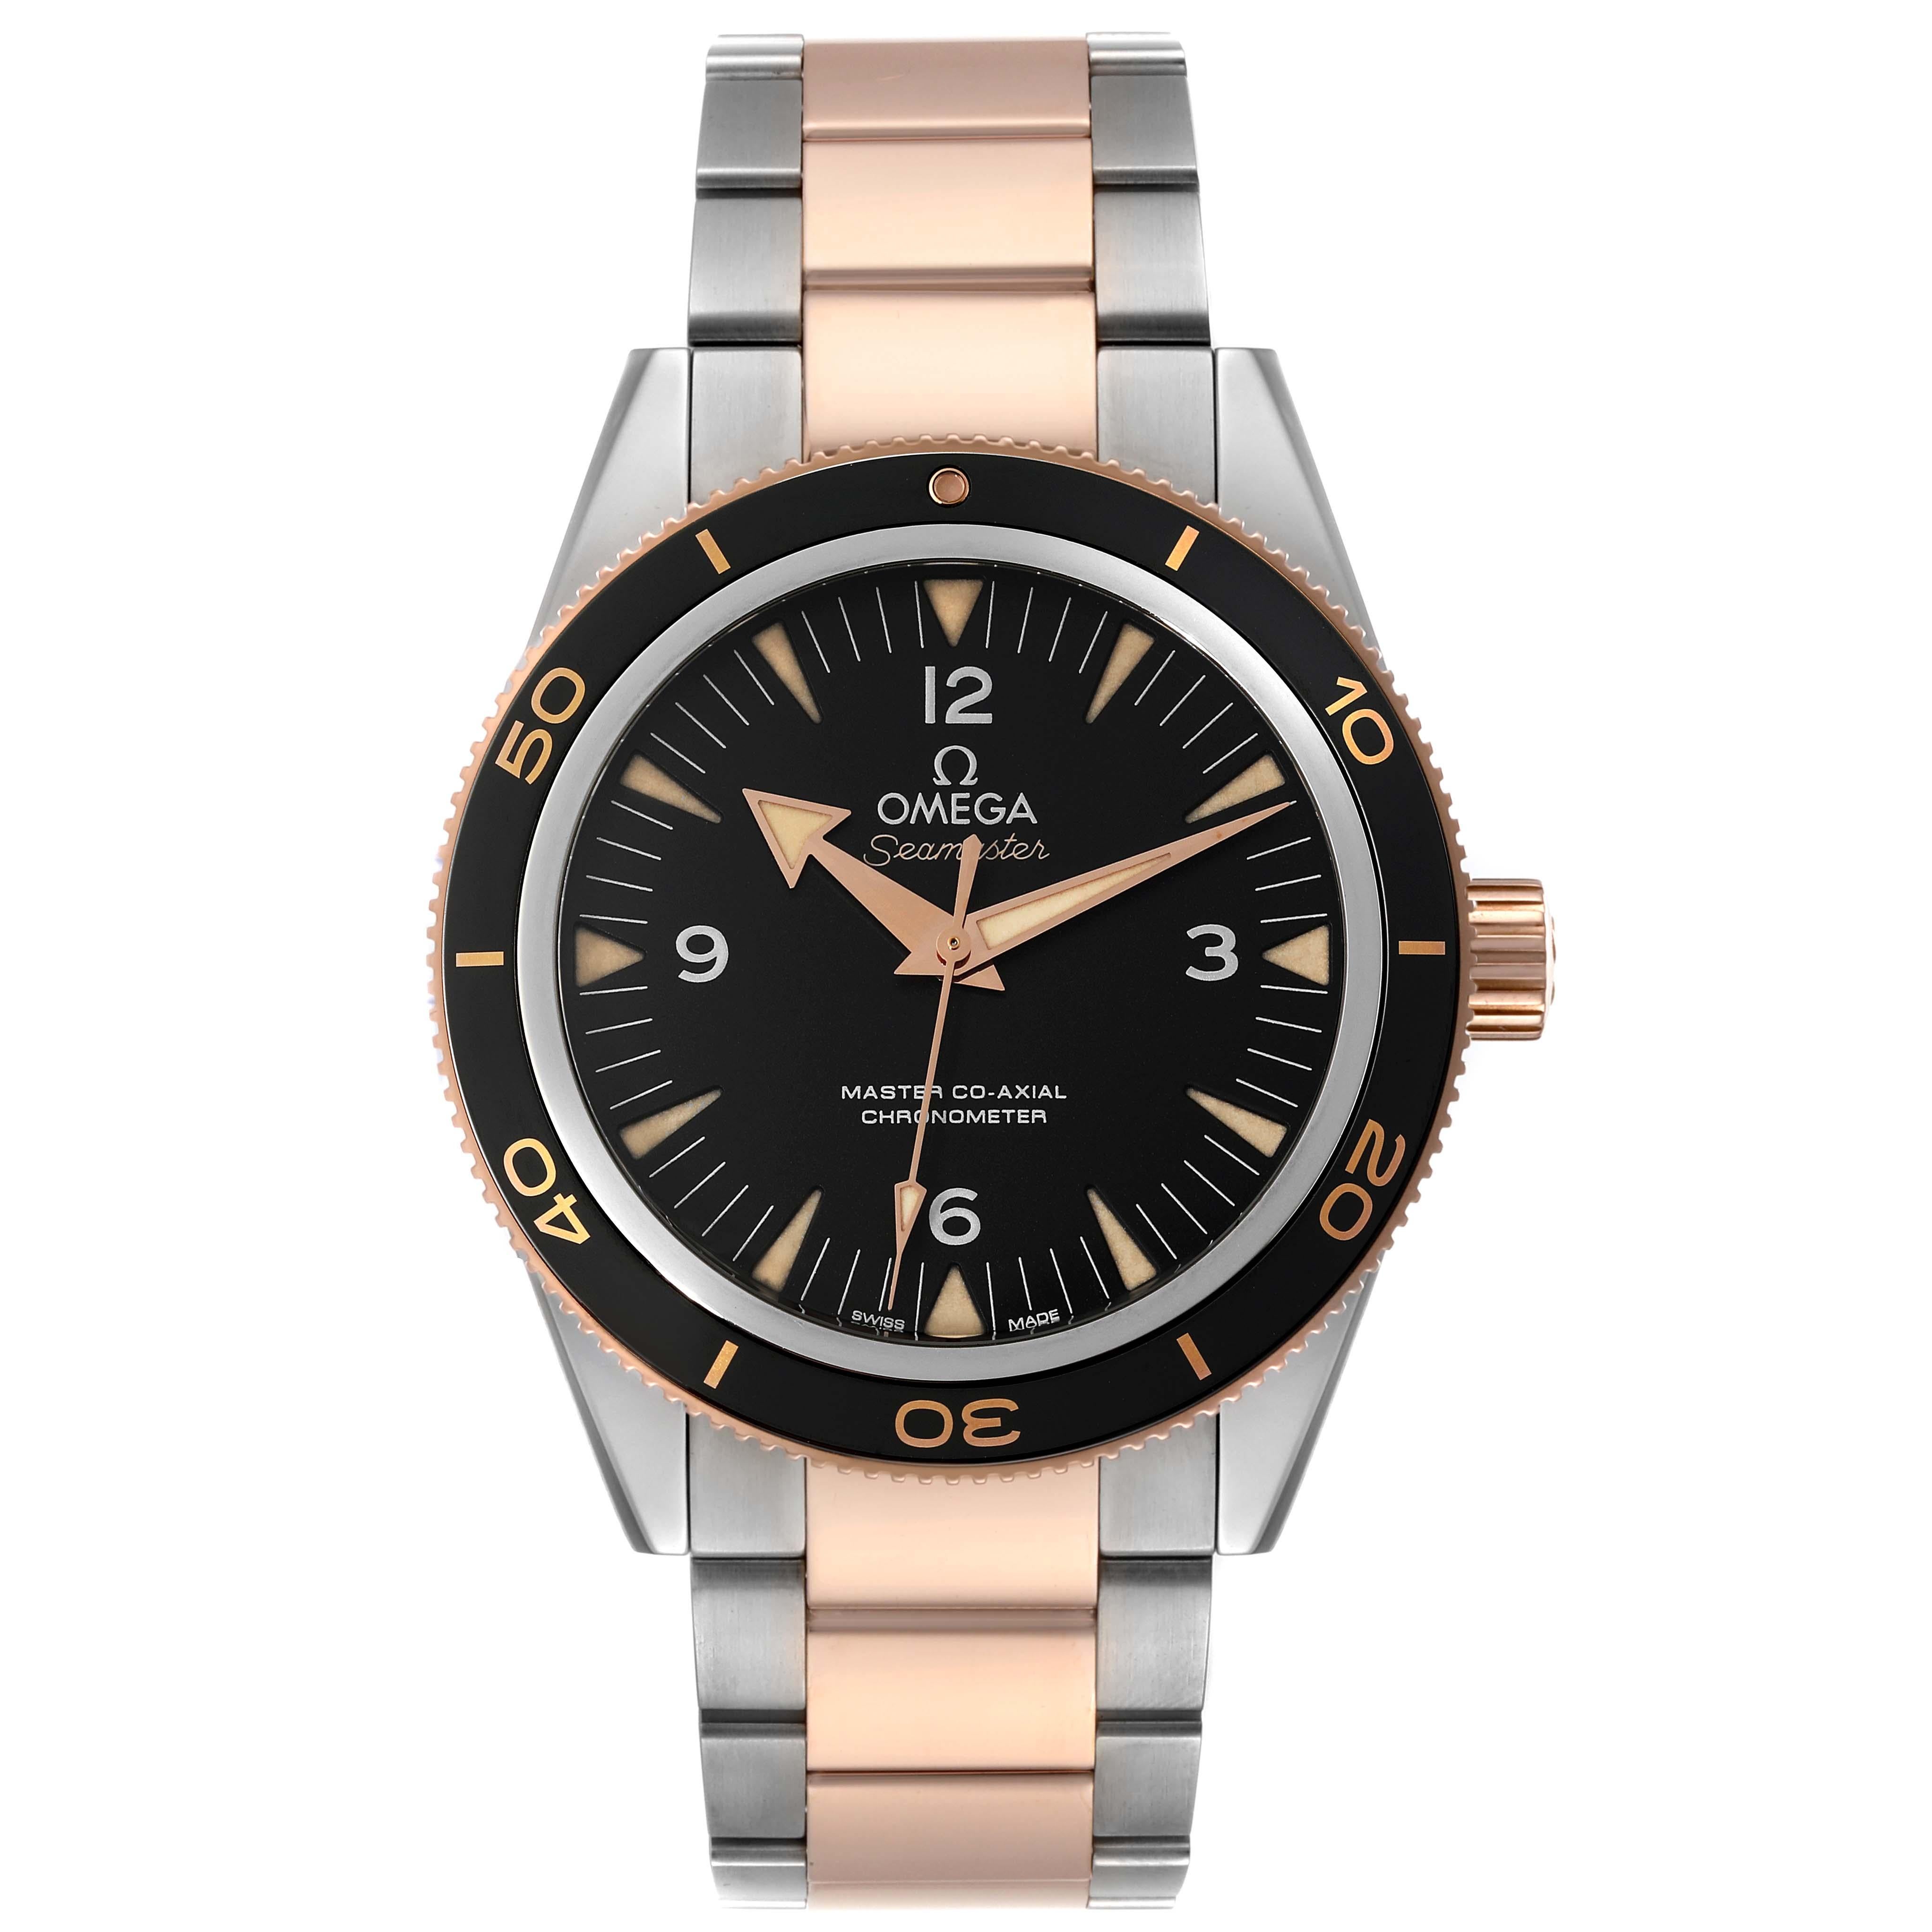 Omega Seamaster 300M Co-Axial Steel Rose Gold Watch 233.20.41.21.01.001. Automatic self-winding movement with Co-Axial escapement. Resistant to magnetic fields greater than 15,000 gauss. Free sprung-balance with silicon balance spring, two barrels